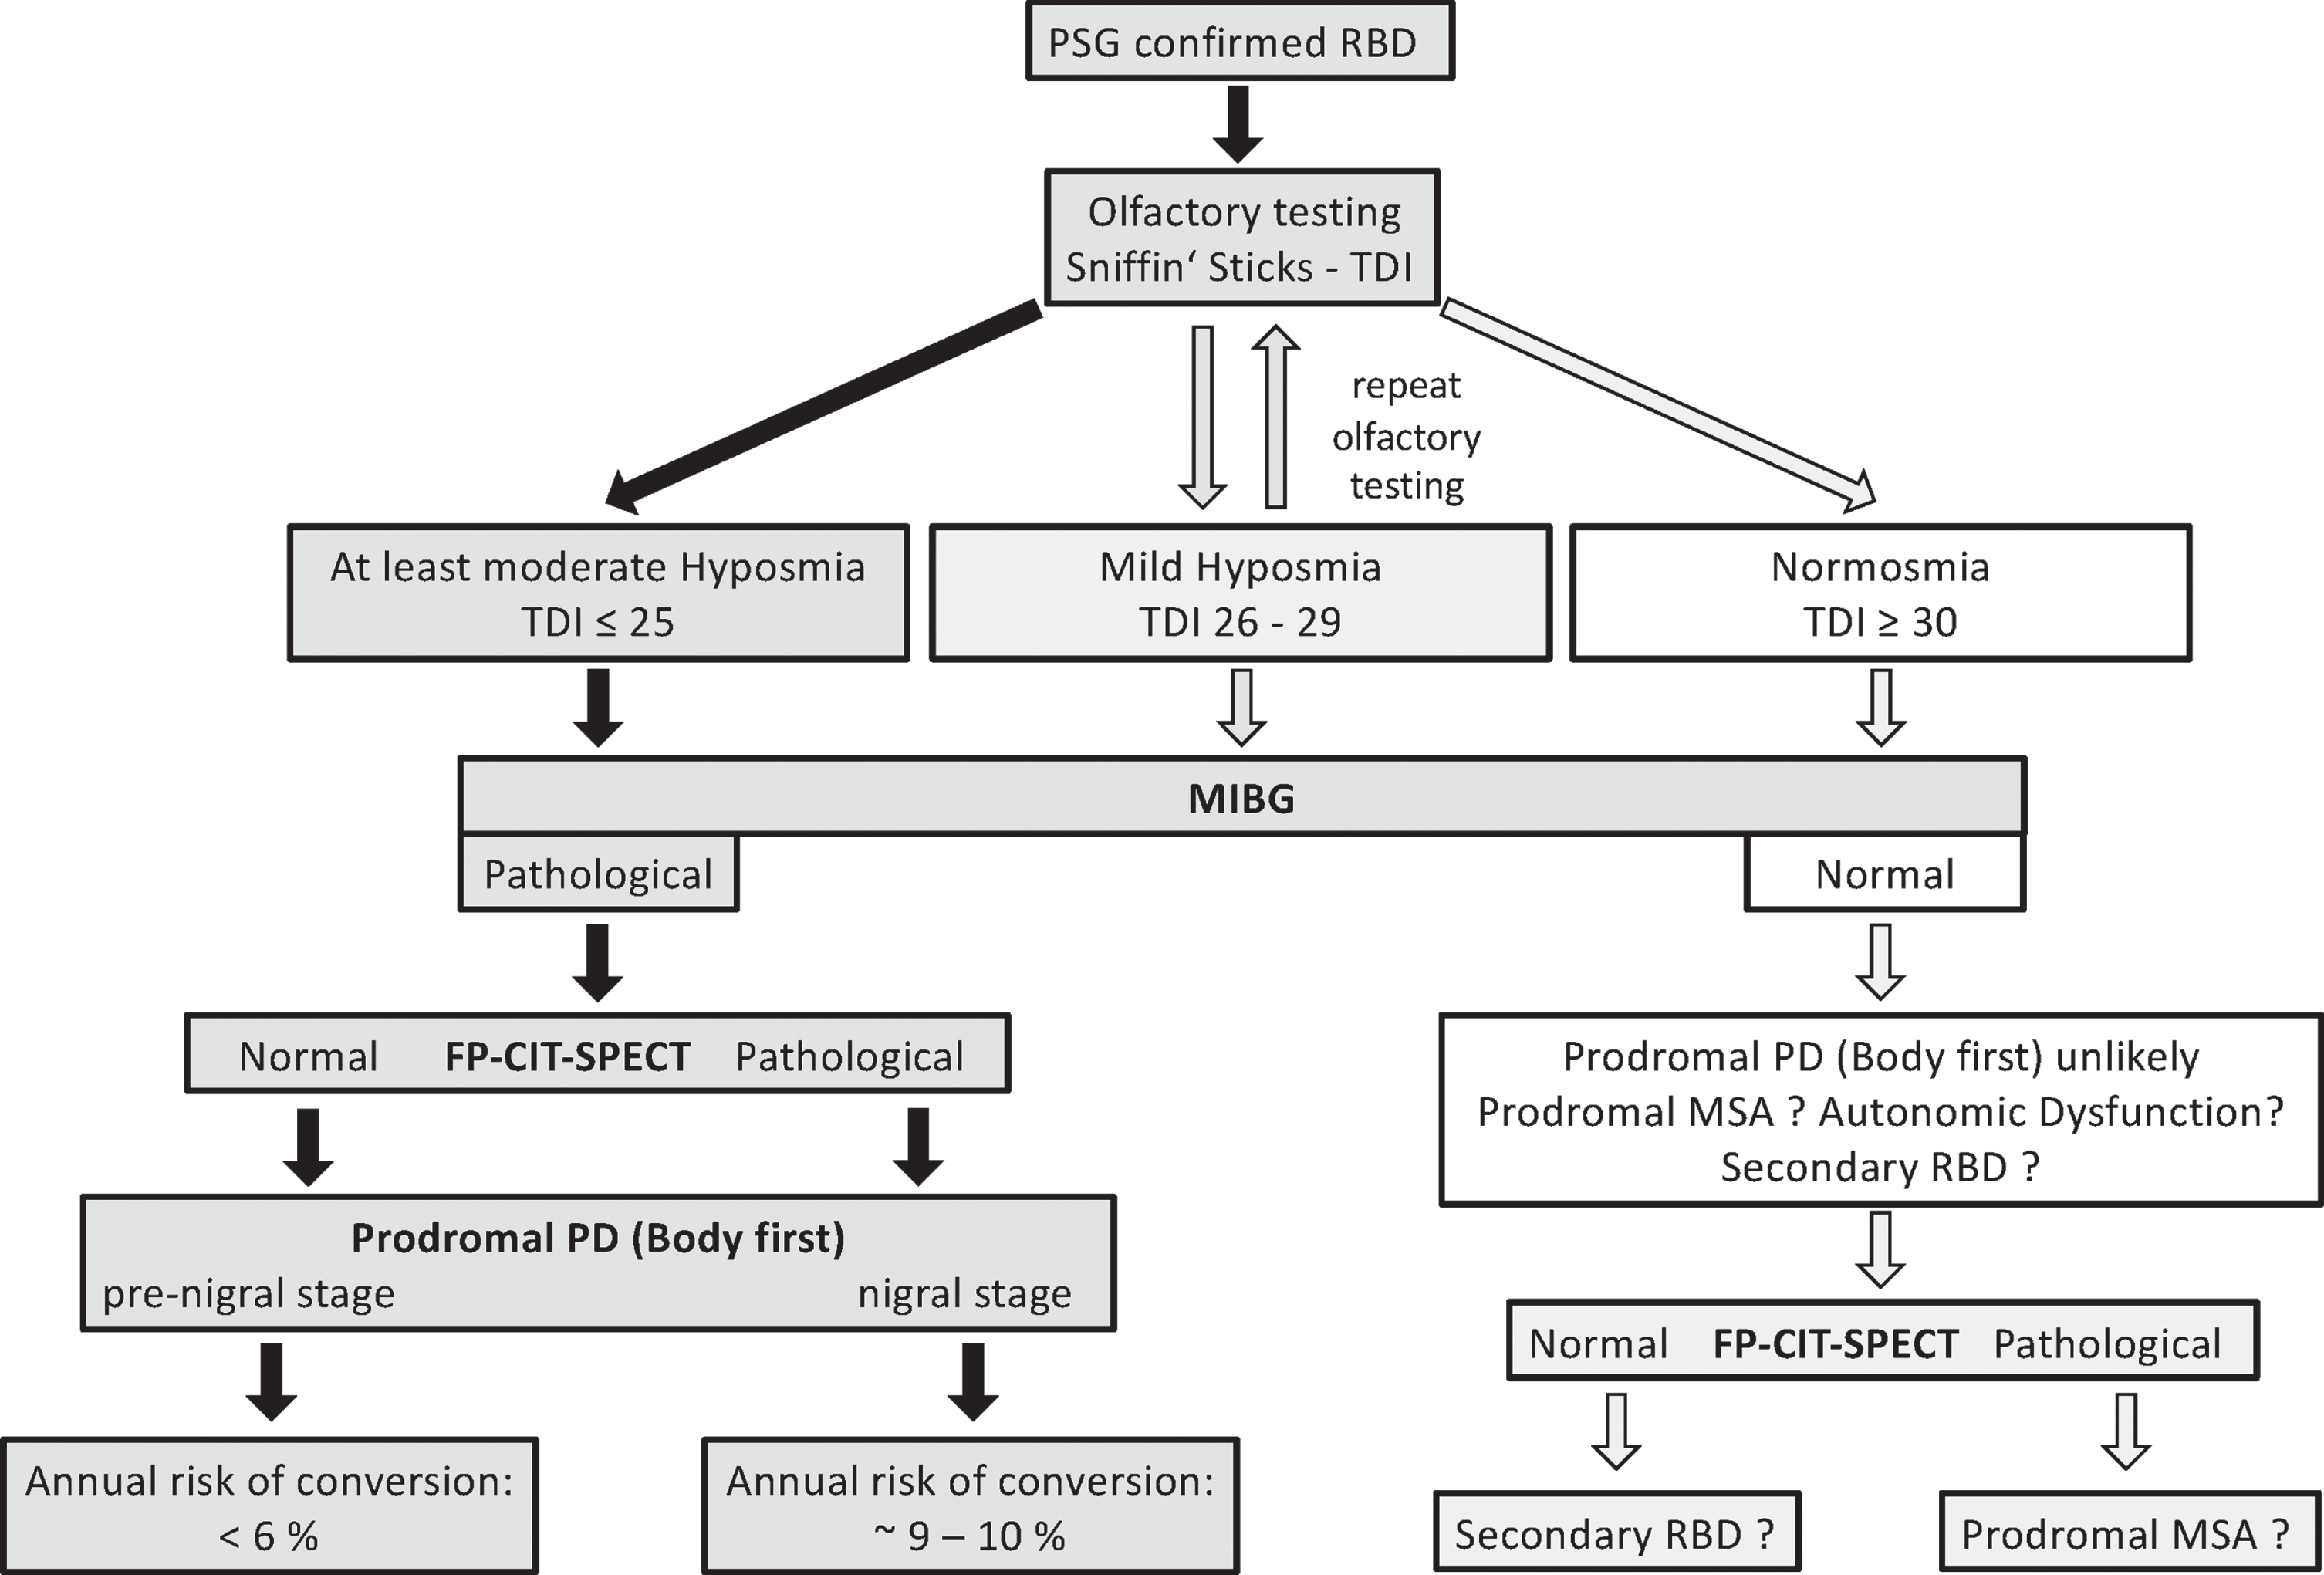 Algorithm for selecting patients with prodromal Parkinson’s disease in clinical trials with disease-modifying therapy based on the results of this study. Subjects with video-polysomnography confirmed RBD should be screened with olfactory testing (Sniffin’ Sticks, to determine TDI score) and [123I]MIBG scintigraphy. In the RBD subjects with abnormal [123I]MIBG scintigraphy, only four subjects presented with TDI > 25 at baseline. In all of these, the olfactory function deteriorated from baseline to follow-up to TDI ≤25 –except for one. Two RBD subjects with normal [123I]MIBG scintigraphy had a TDI ≤25 at baseline: one stayed below TDI < 25, one improved to normosmia at follow-up. In case of abnormal [123I]MIBG scintigraphy, this should be followed by [123I]FP-CIT-SPECT. RBD subjects with both, abnormal [123I]MIBG scintigraphy and [123I]FP-CIT-SPECT show an annual conversion rate between ∼9–10%.